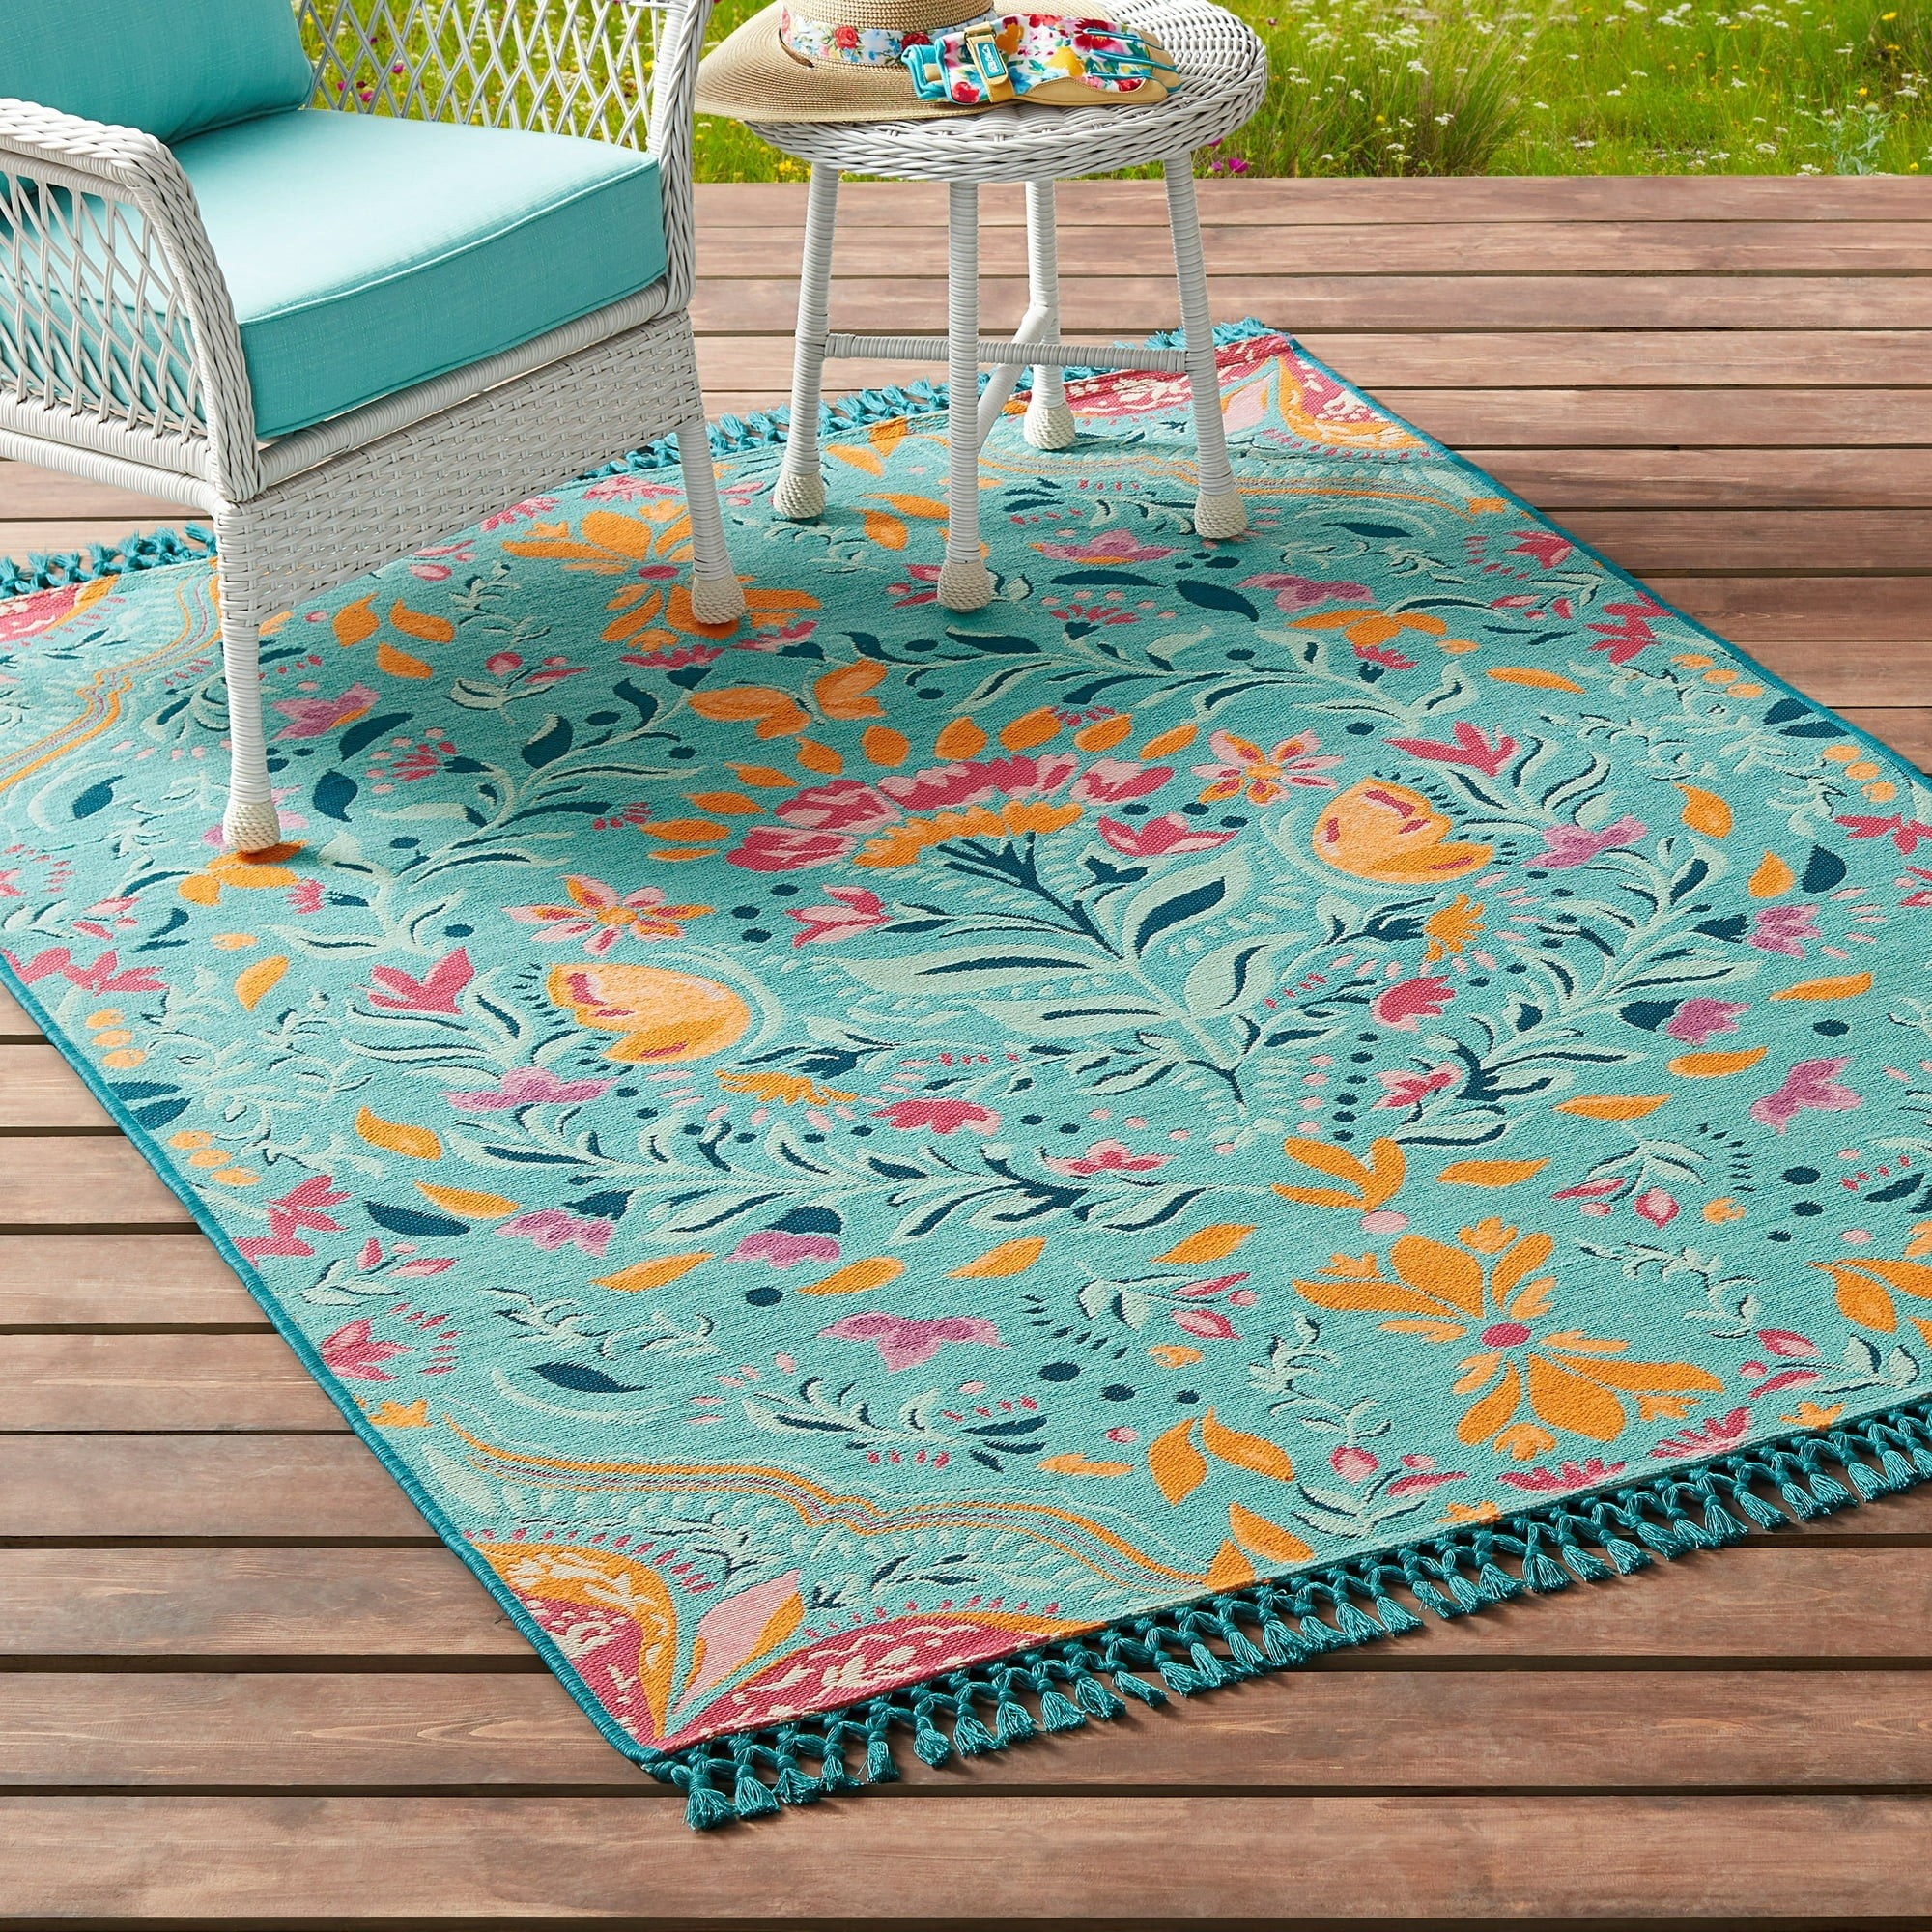 the turquoise rug with yellow and pink accents and fringe on a deck